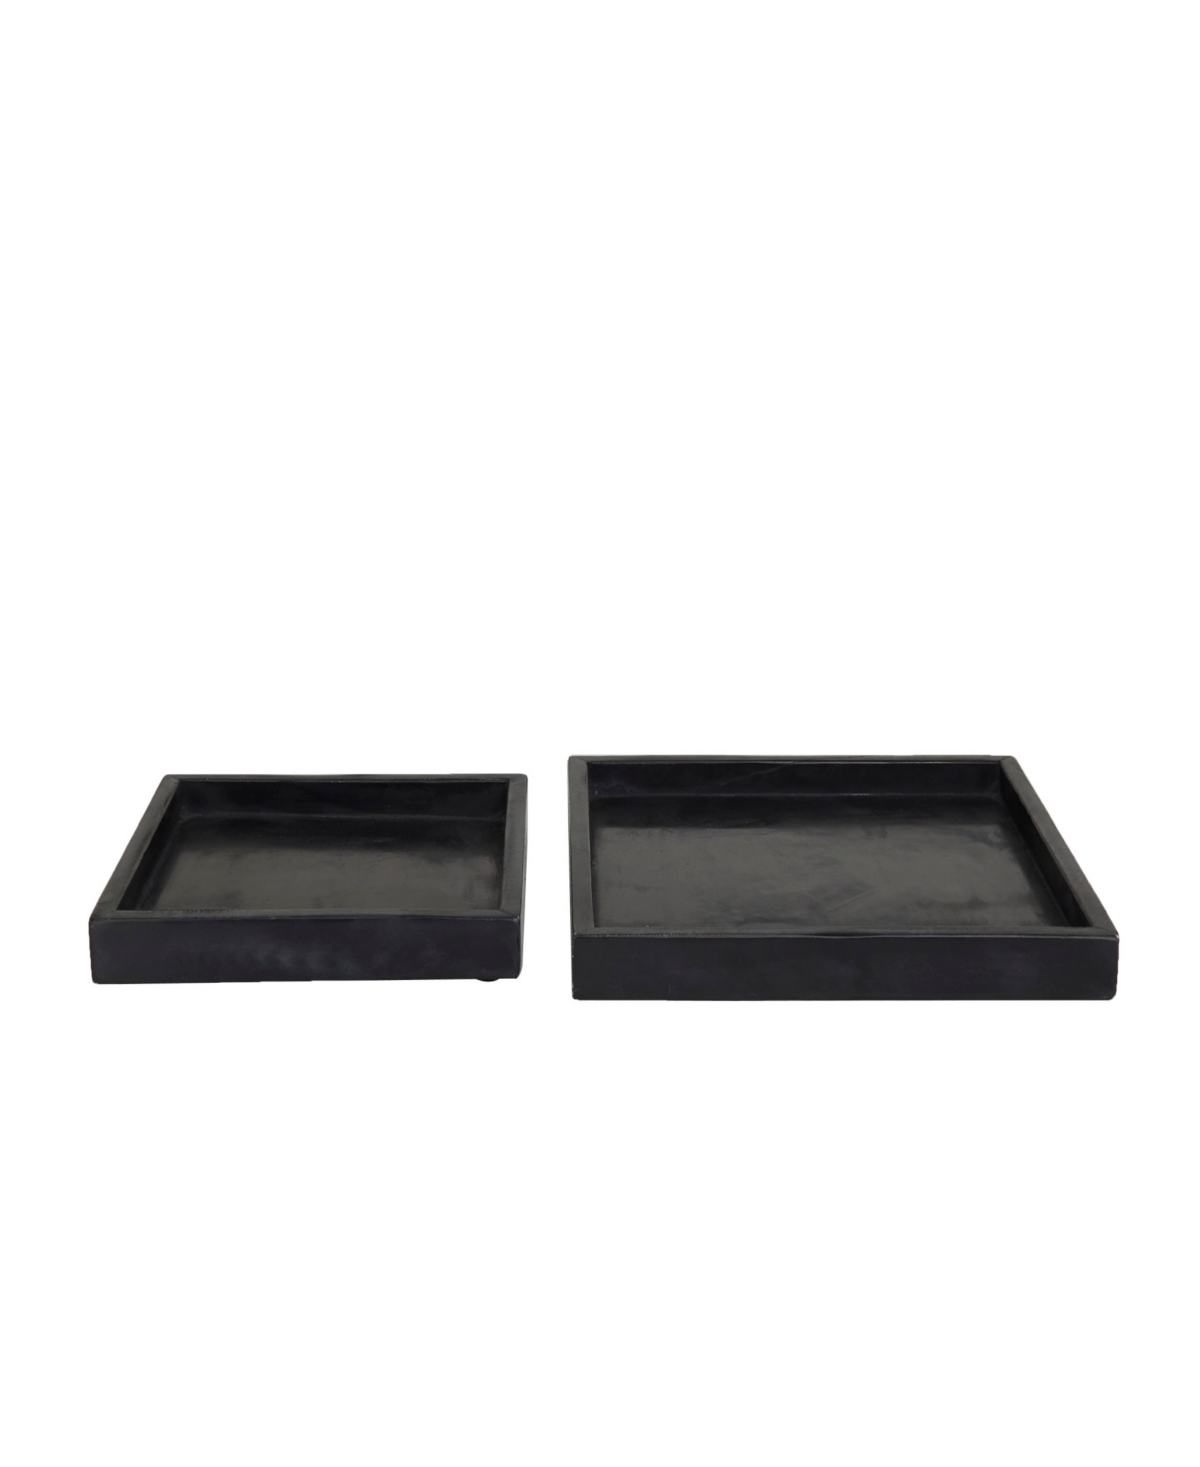 Rosemary Lane Marble Tray With Raised Border, Set Of 2, 10", 8" W In Black